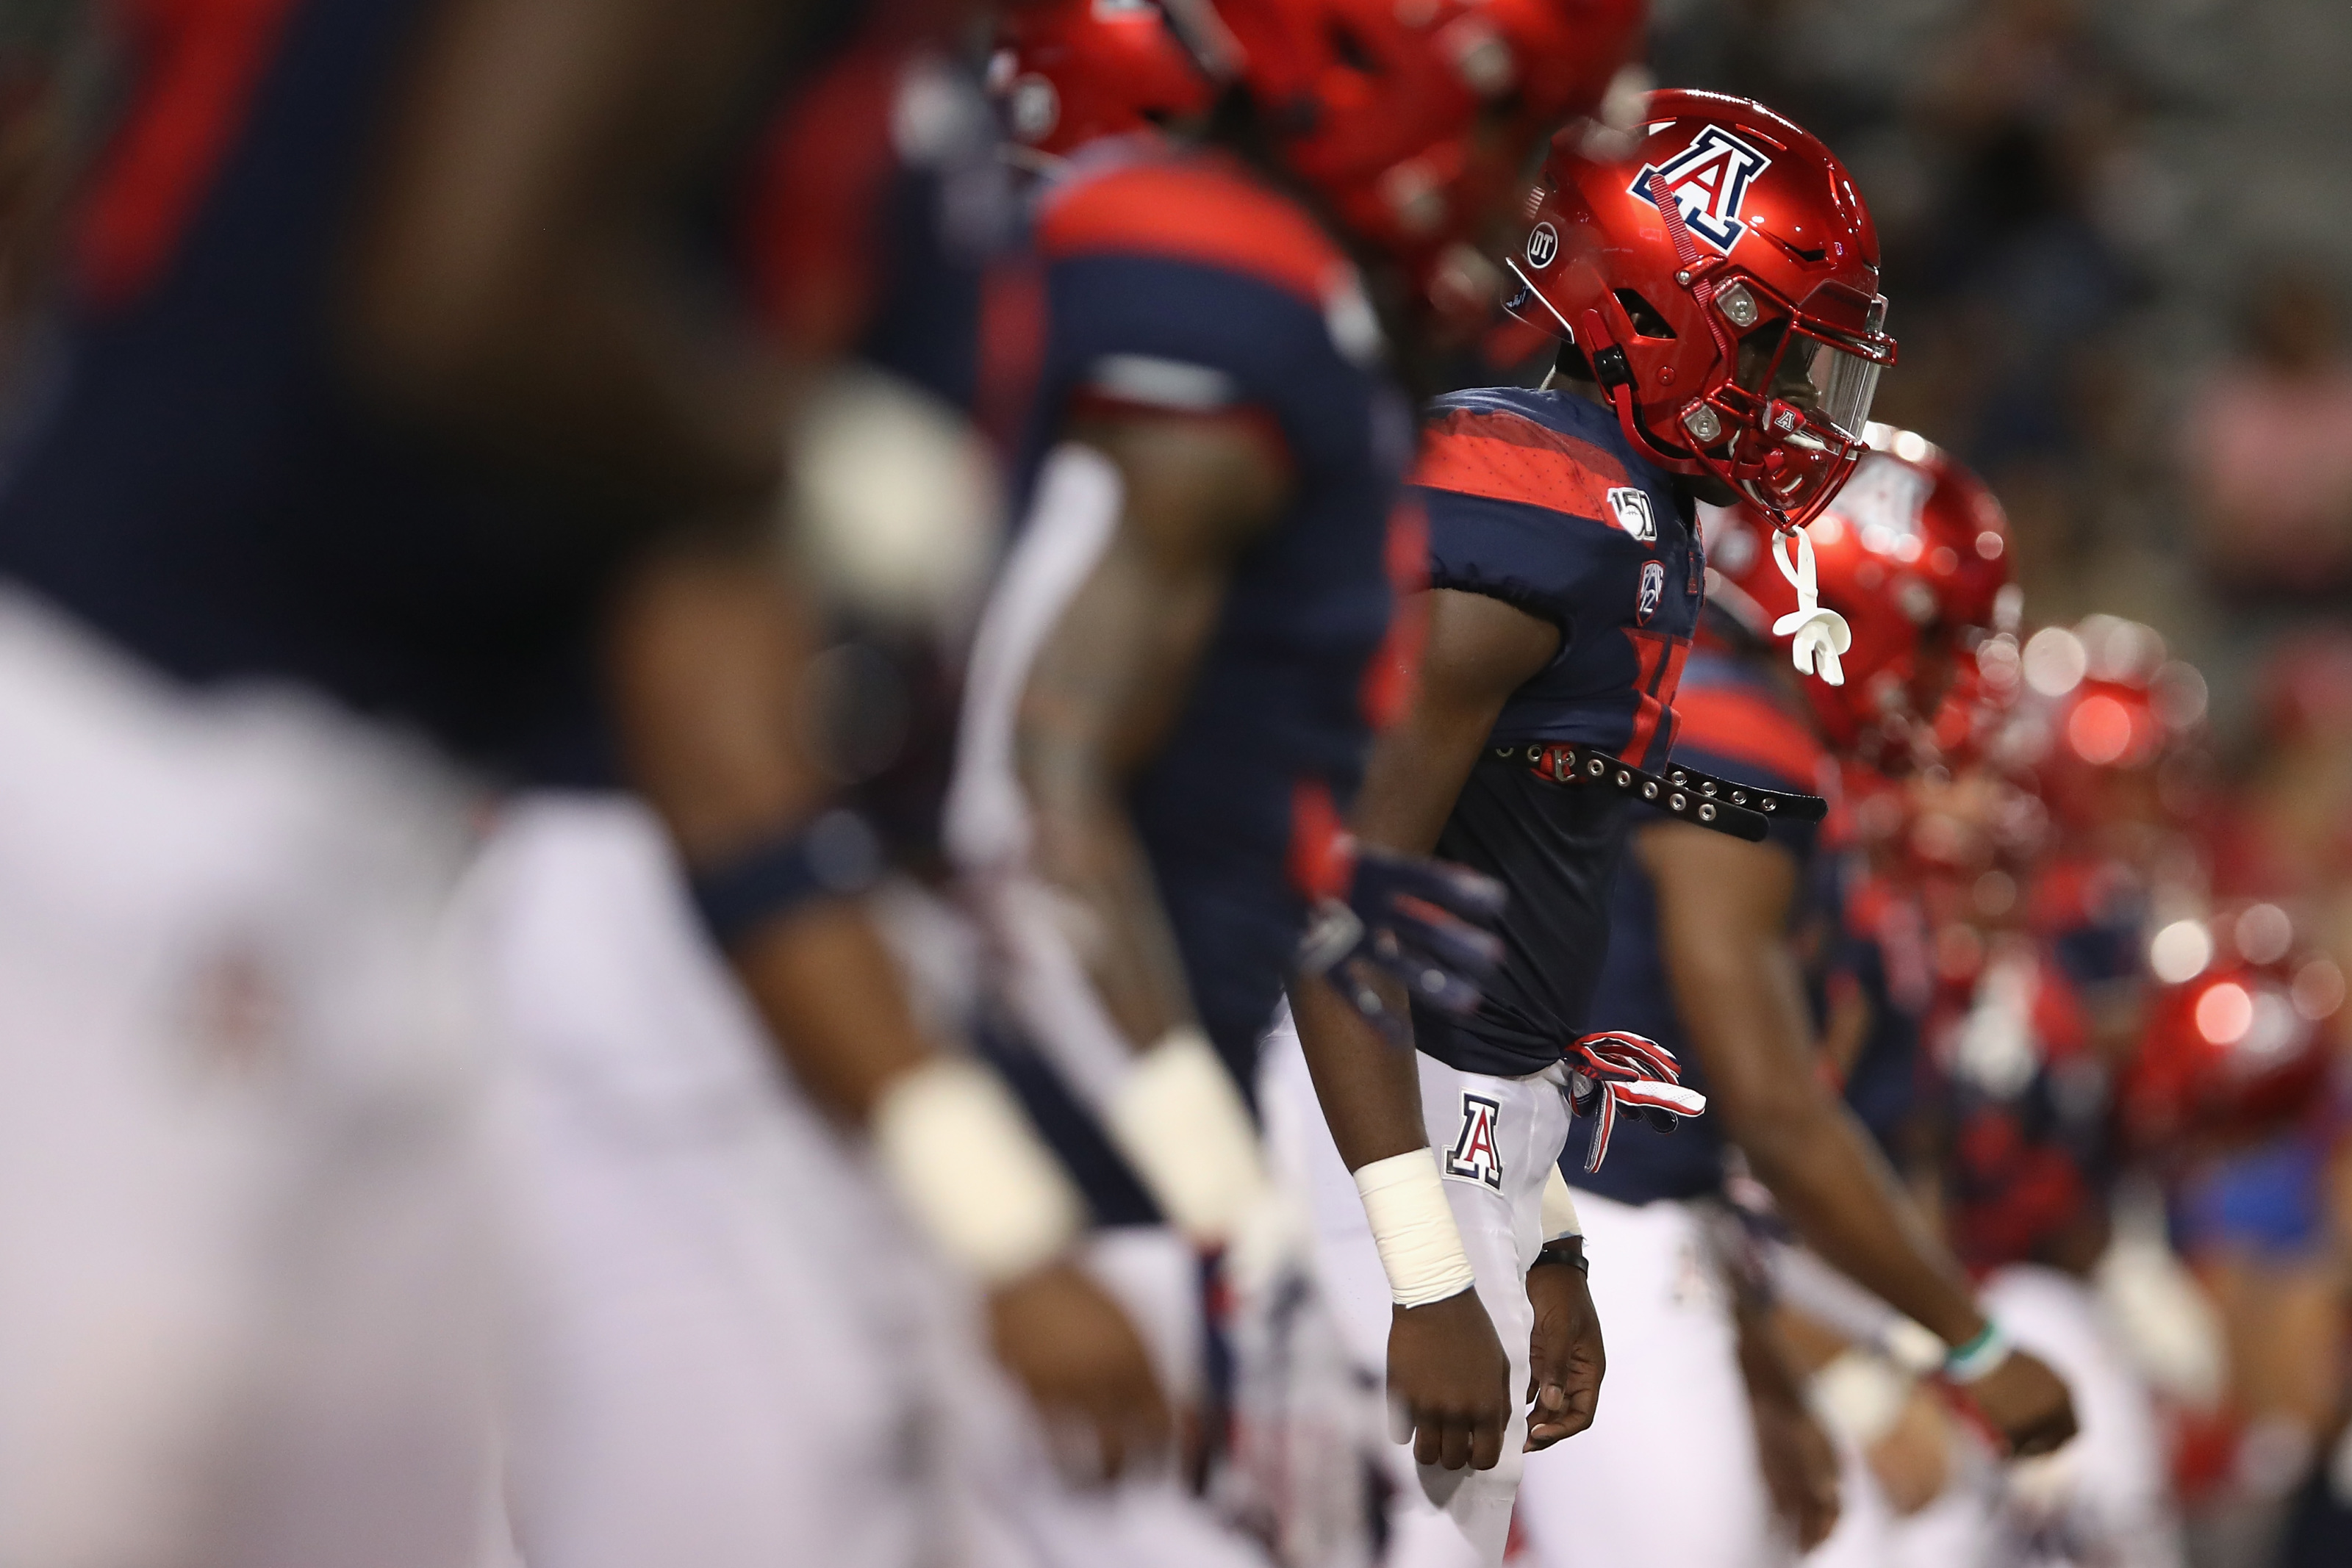 Opinion: These uniform designs have to go for Arizona Football